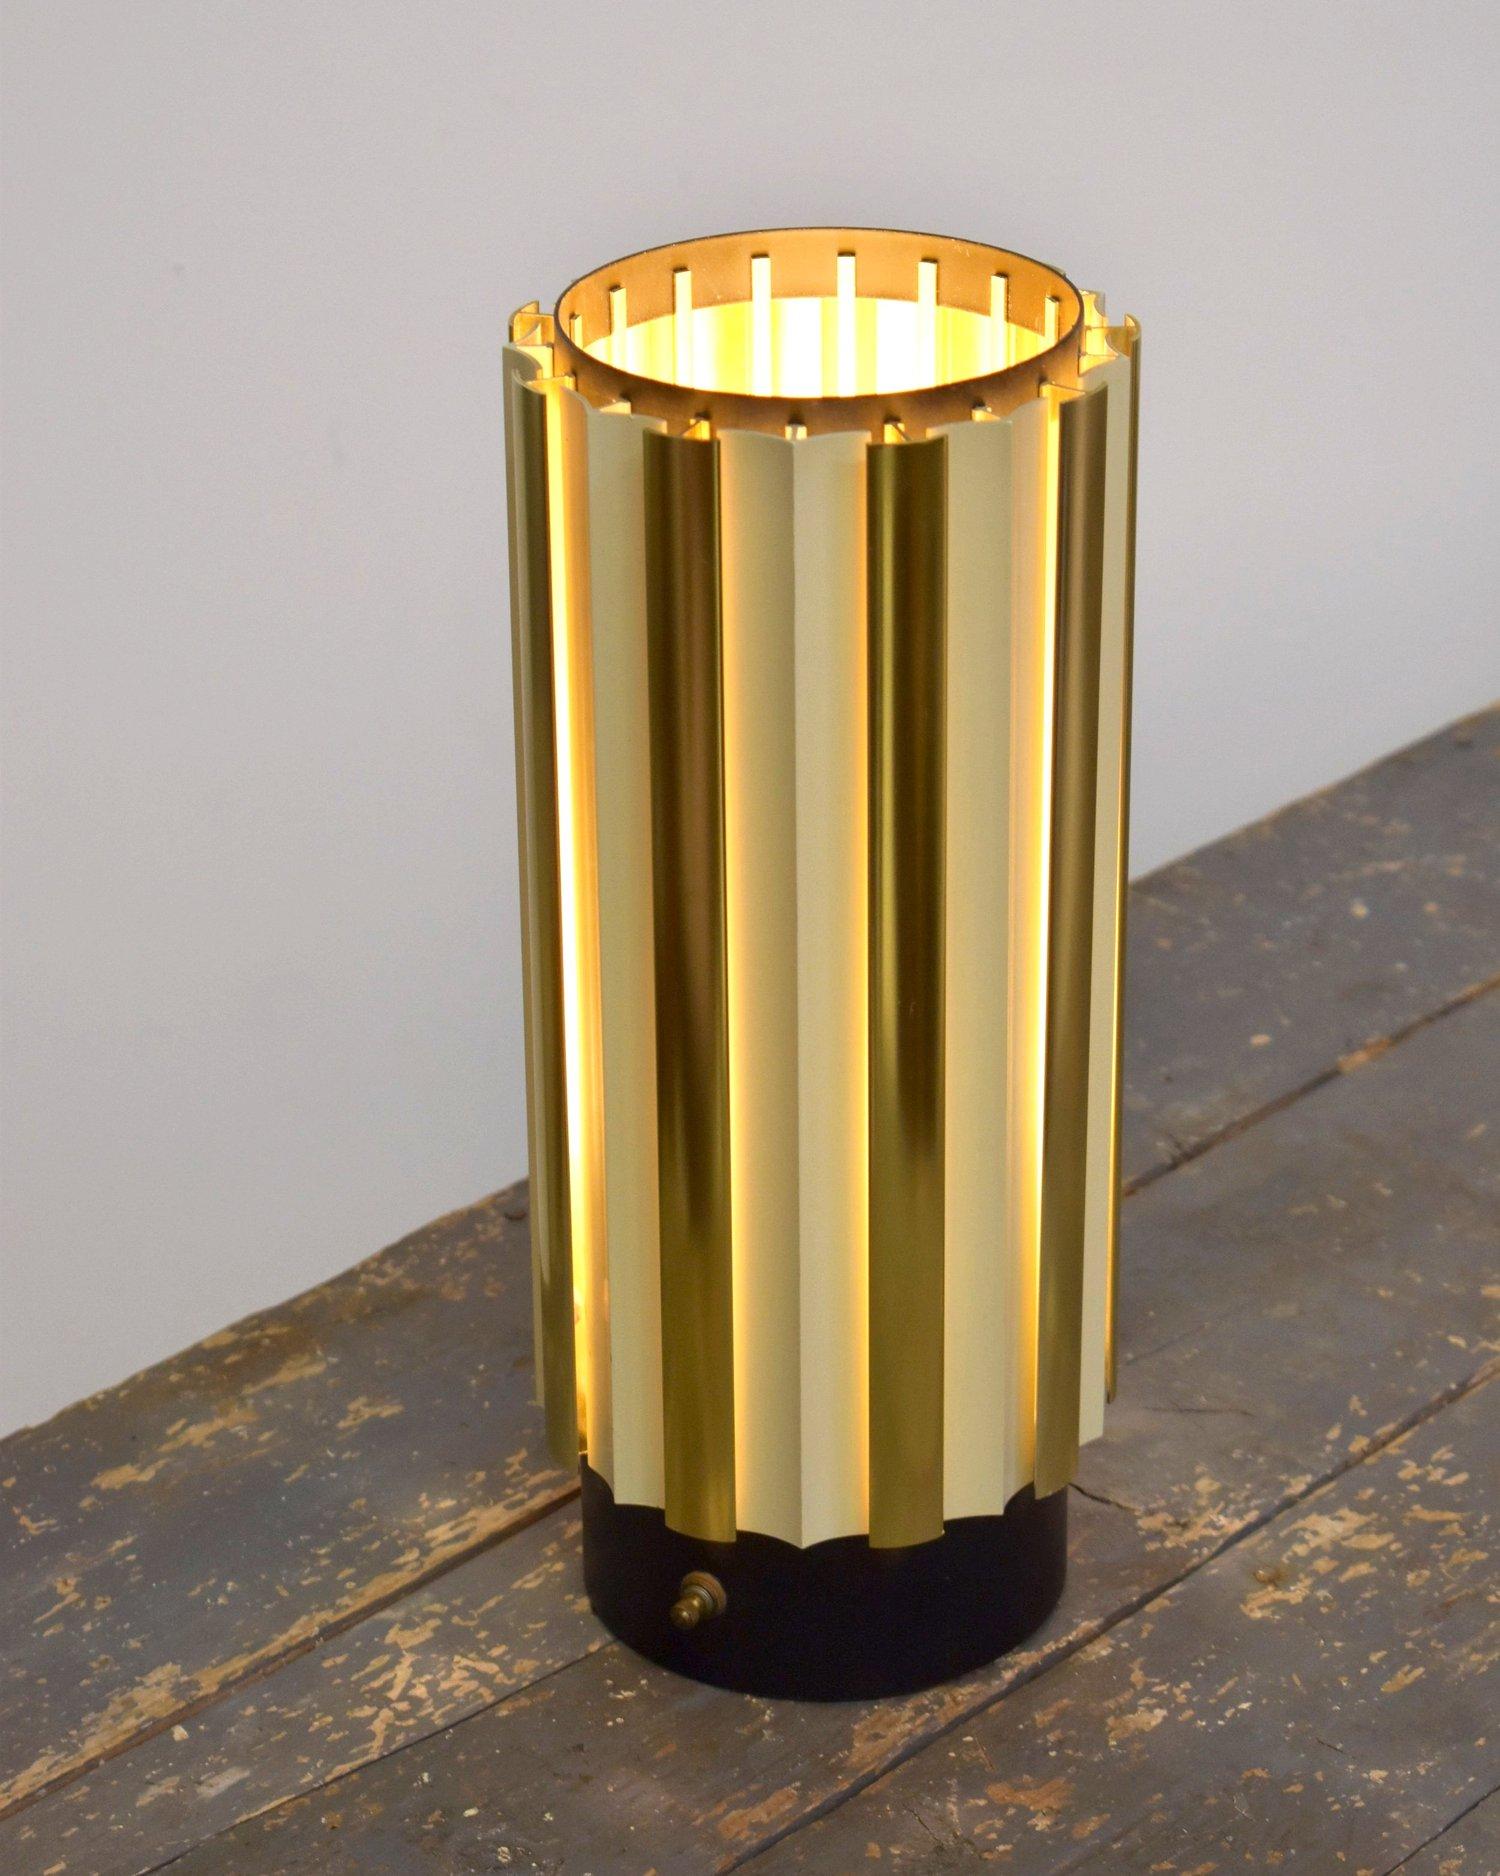 American Vintage Louvered Metal Lamp Attributed to Gerald Thurston for Lightolier, 1960s For Sale